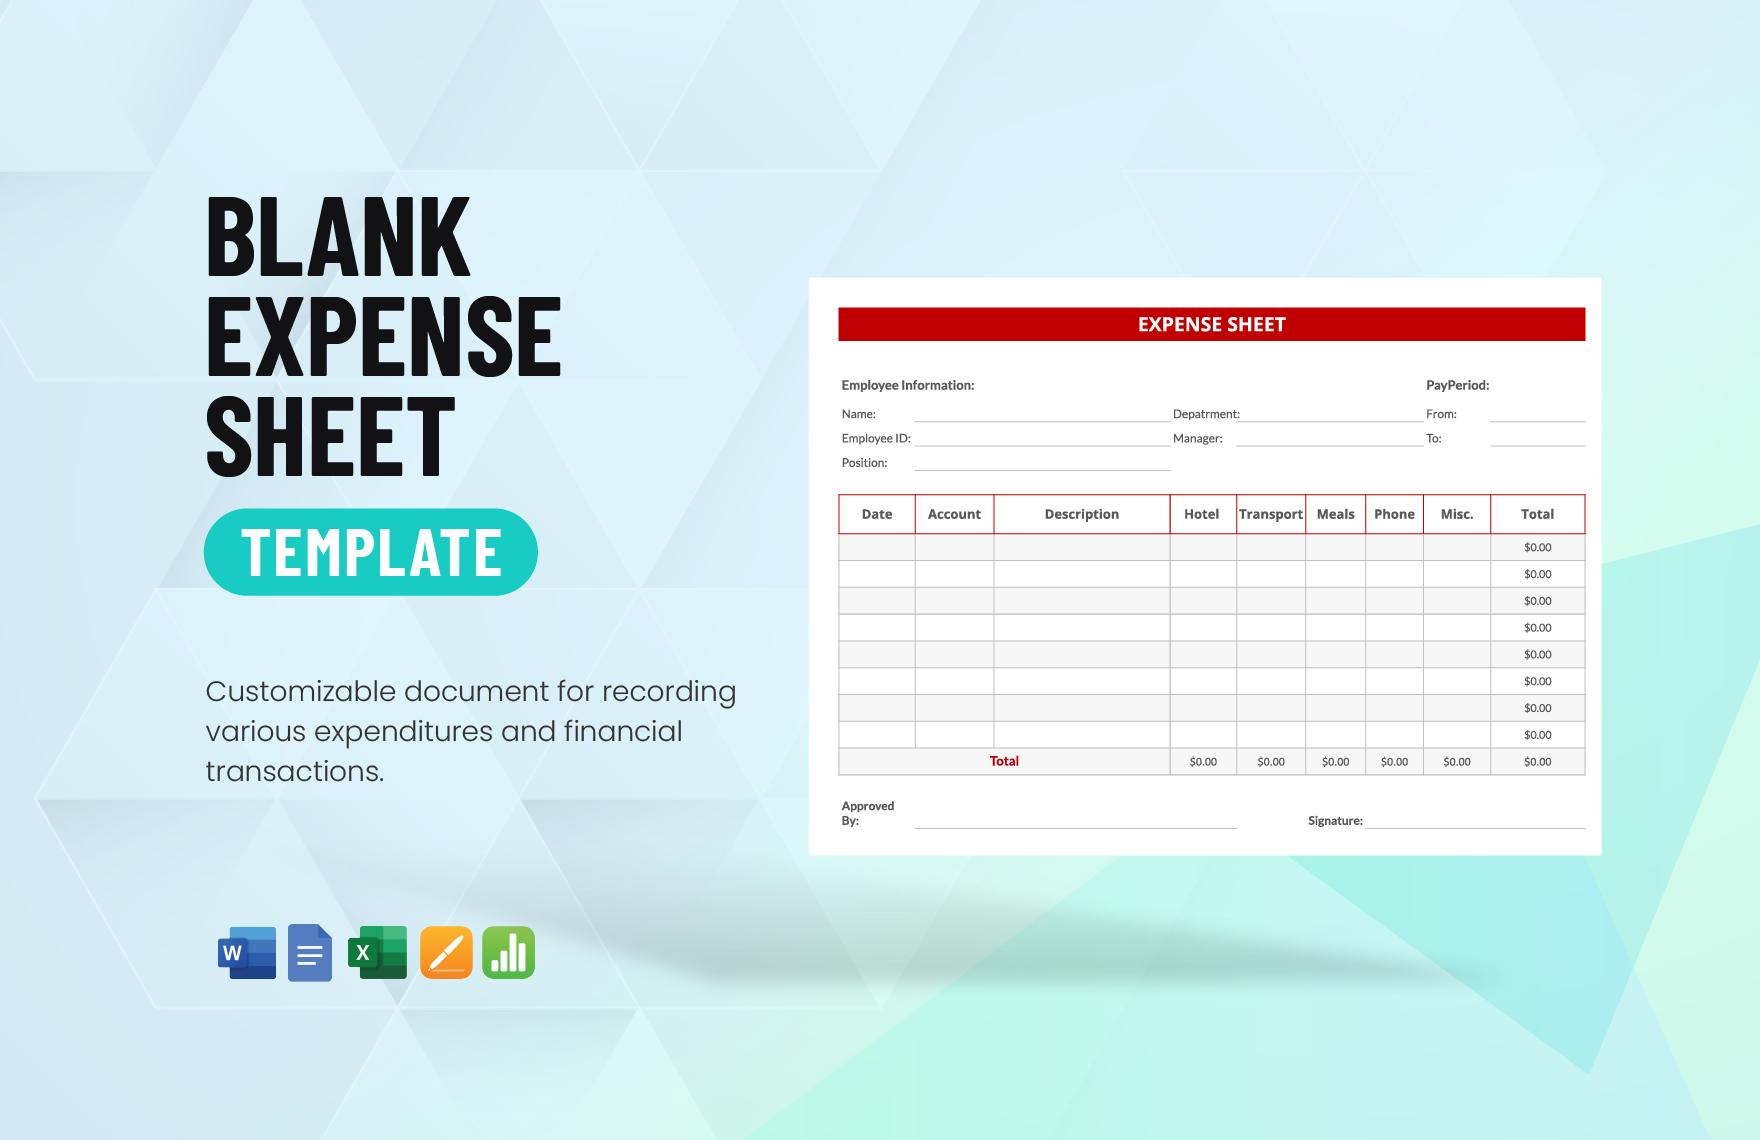 Blank Expense Sheet Template in Word, Google Docs, Excel, Apple Pages, Apple Numbers